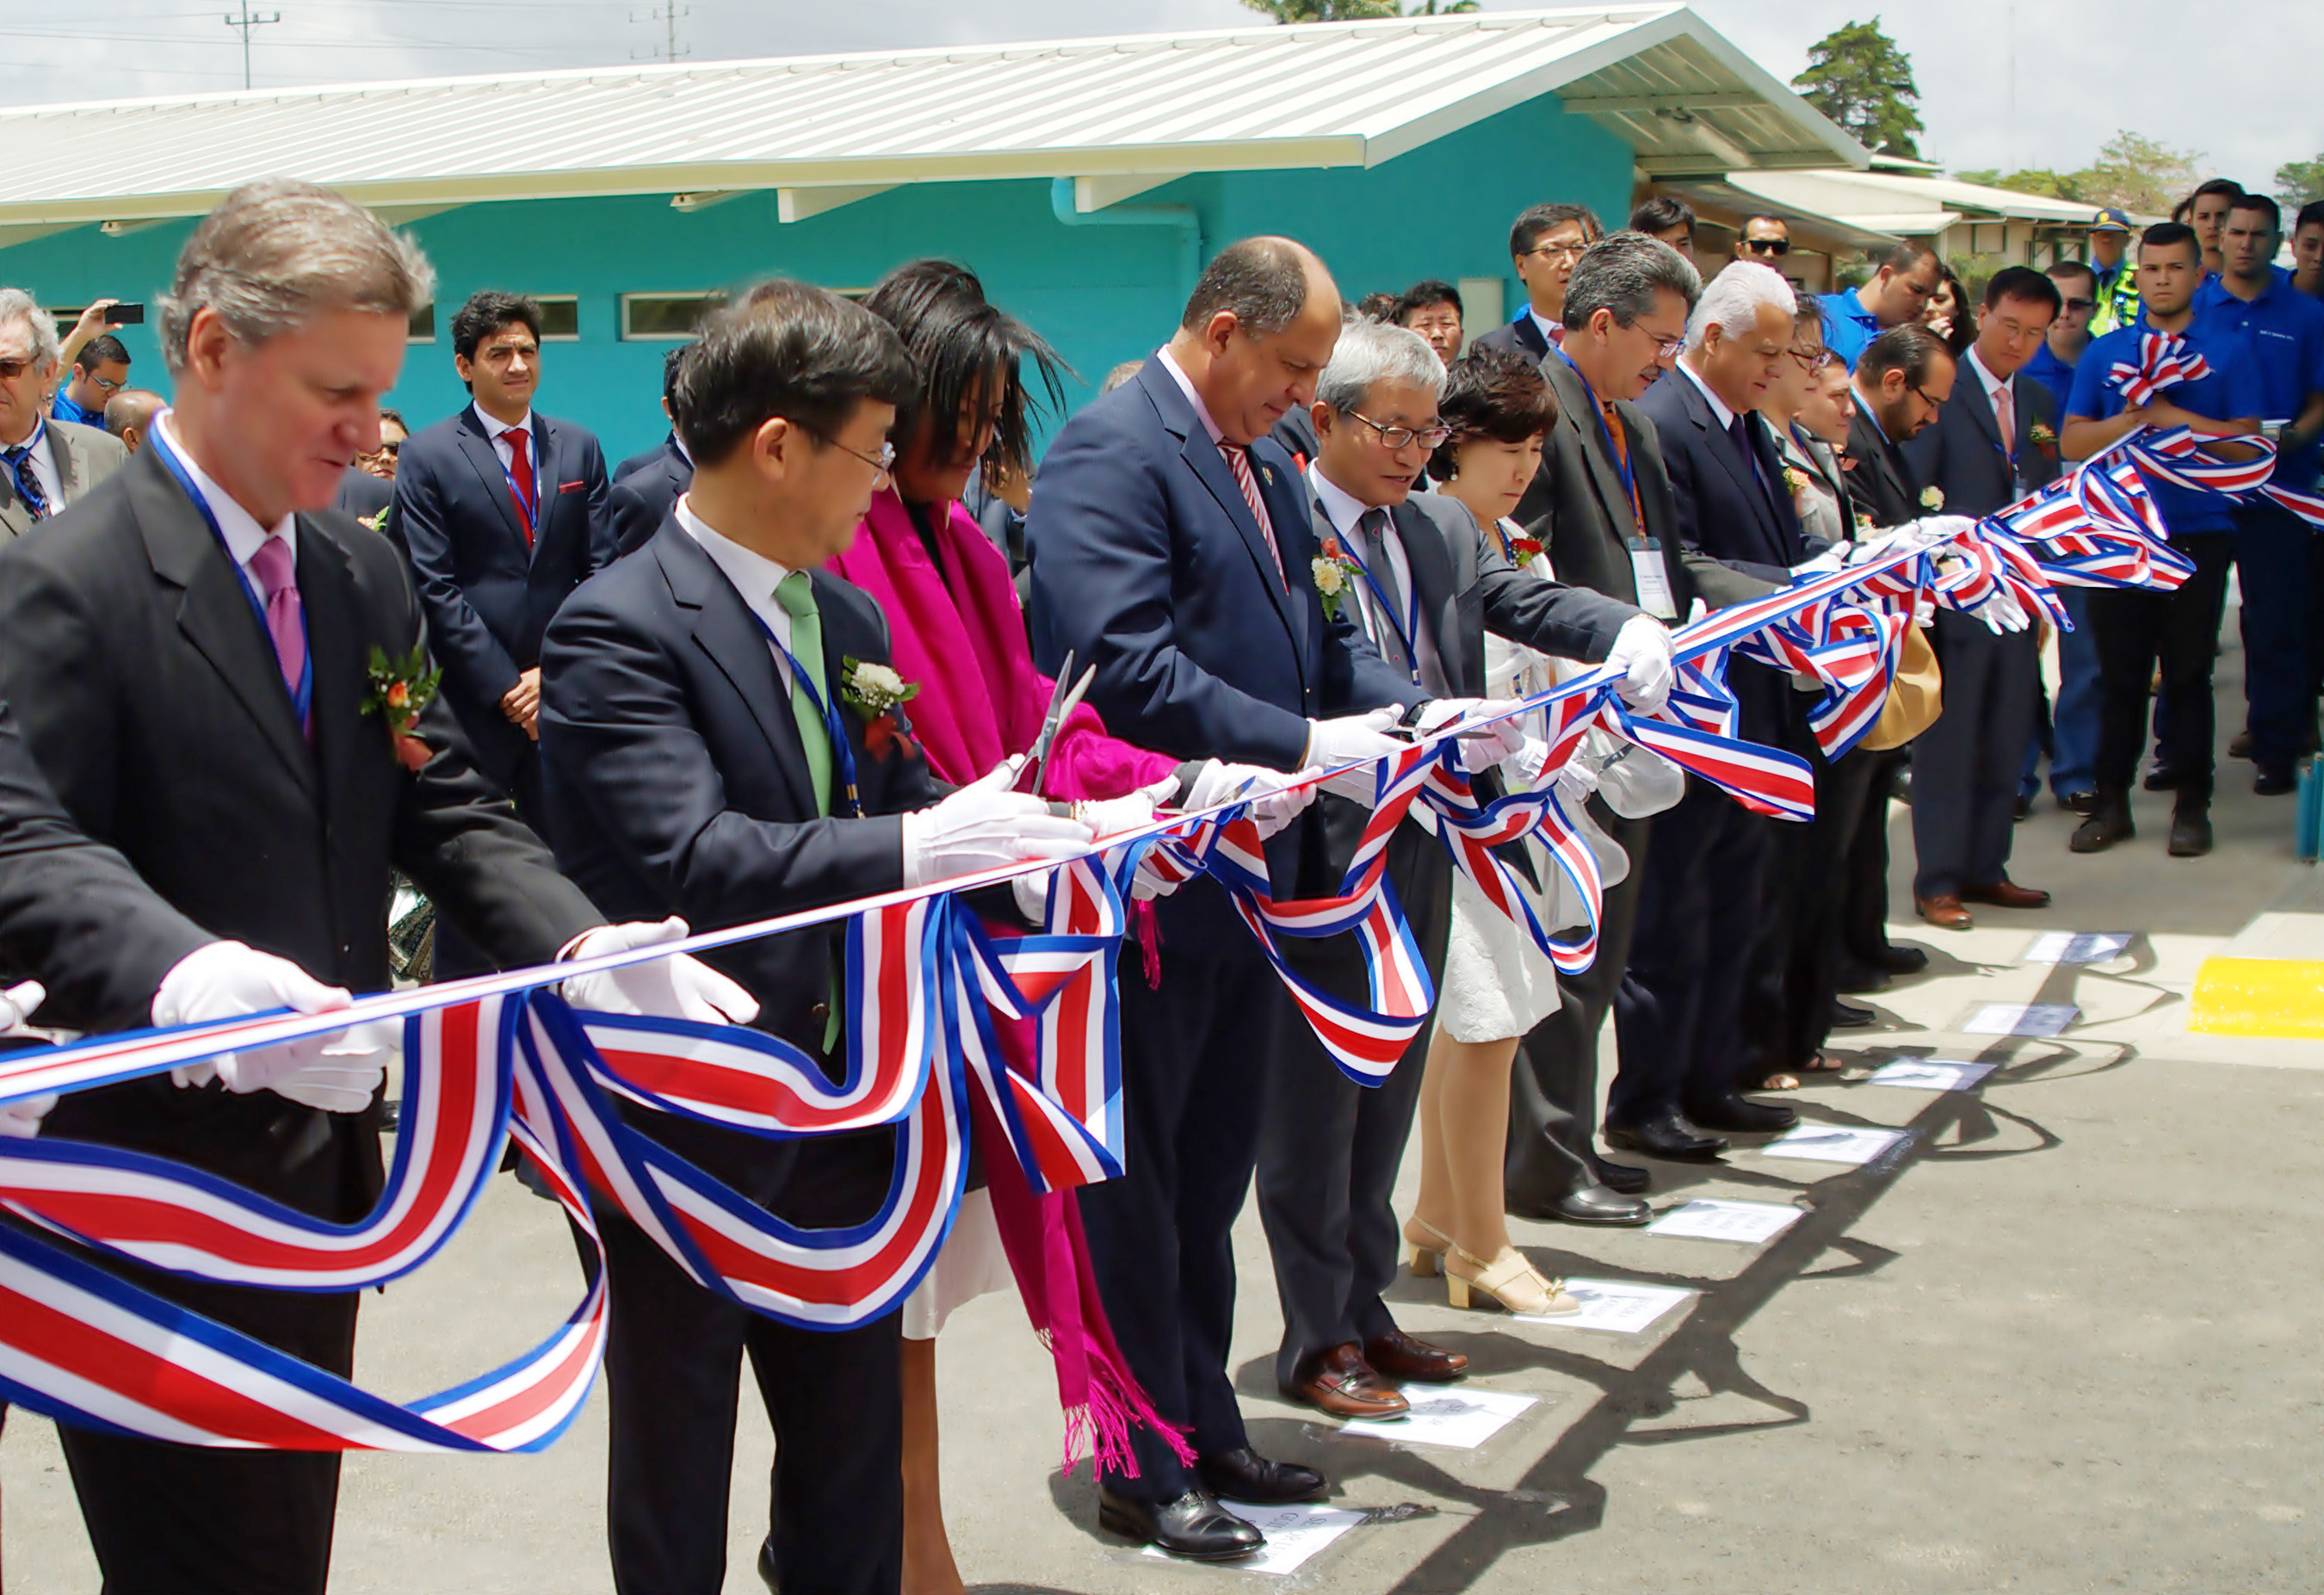 Sae-A Spinning is holding a ribbon-cutting to officially open the Sae-A Spinning S.R.L. Beginning third from the left, Cheryl Mills, Counselor and Chief of Staff for former Secretary of State to the United States (2009-2013) and Founder of BlackIvy Group; Luis Guillermo Solis, Costa Rican President; and Kim Woong-ki, Sae-A Trading Co. Ltd Chairman are pictured.